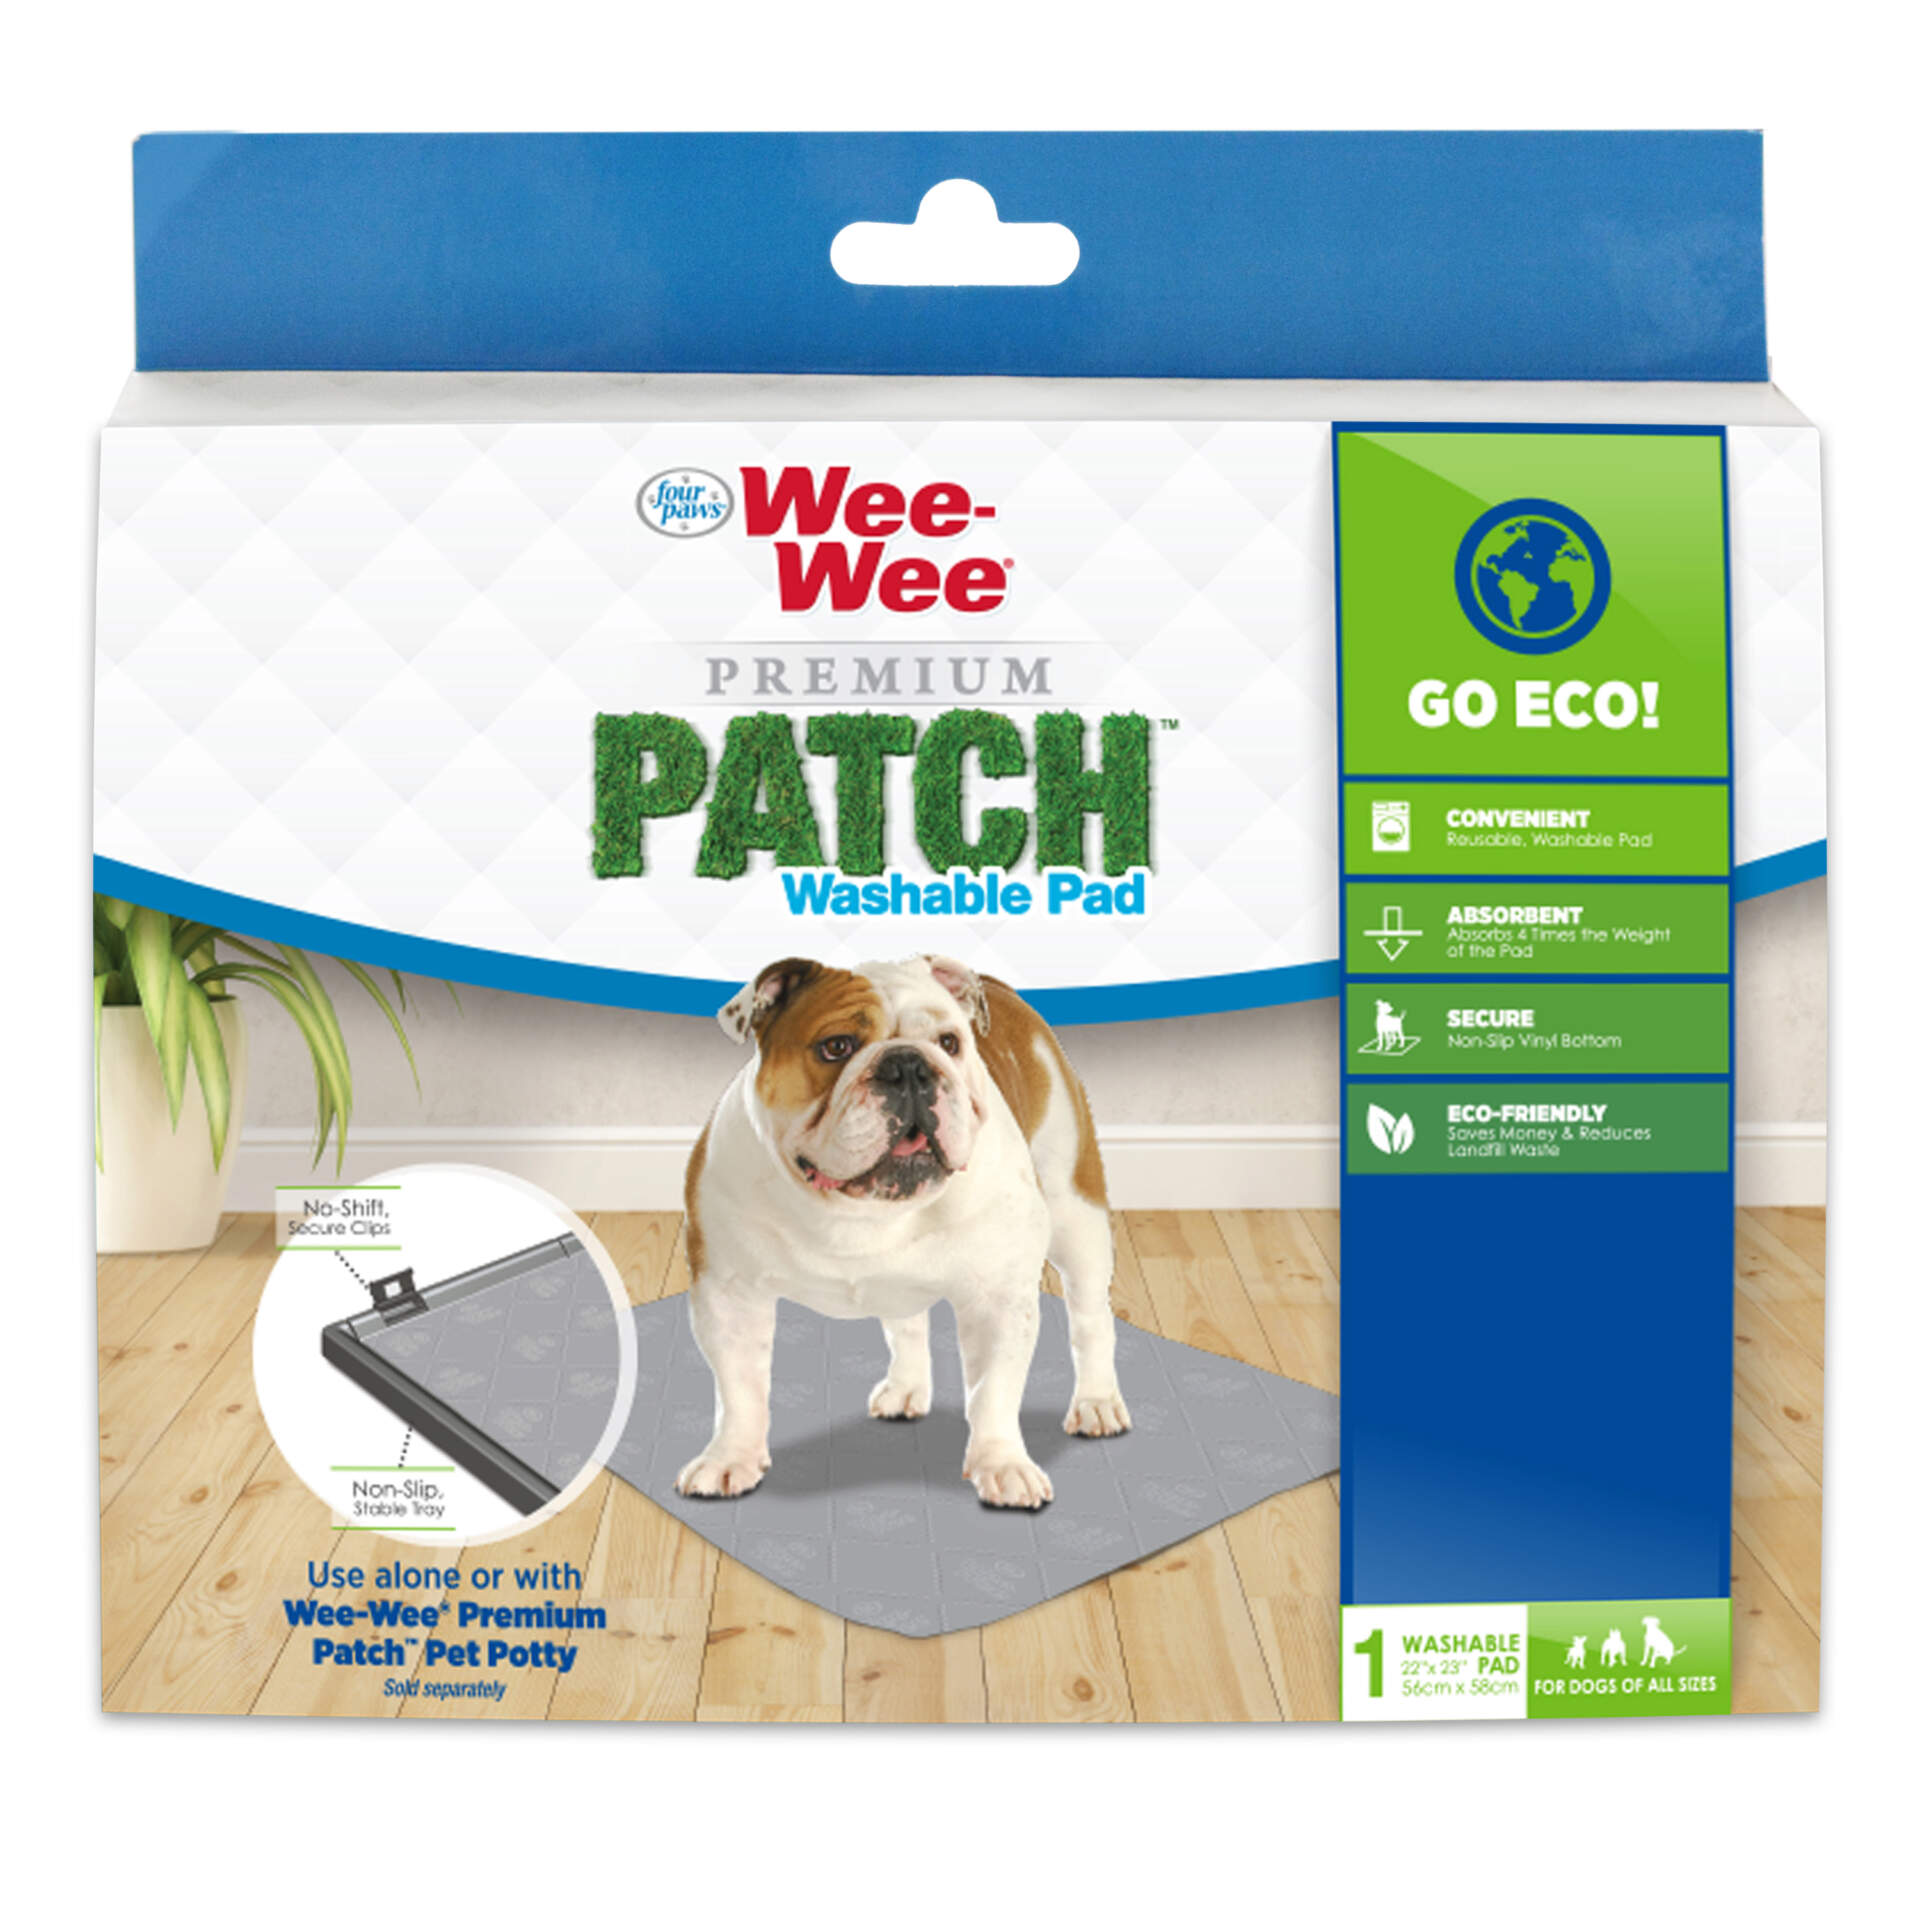 045663974817-wee-wee-premium-patch-washable-pad-in-packaging-front